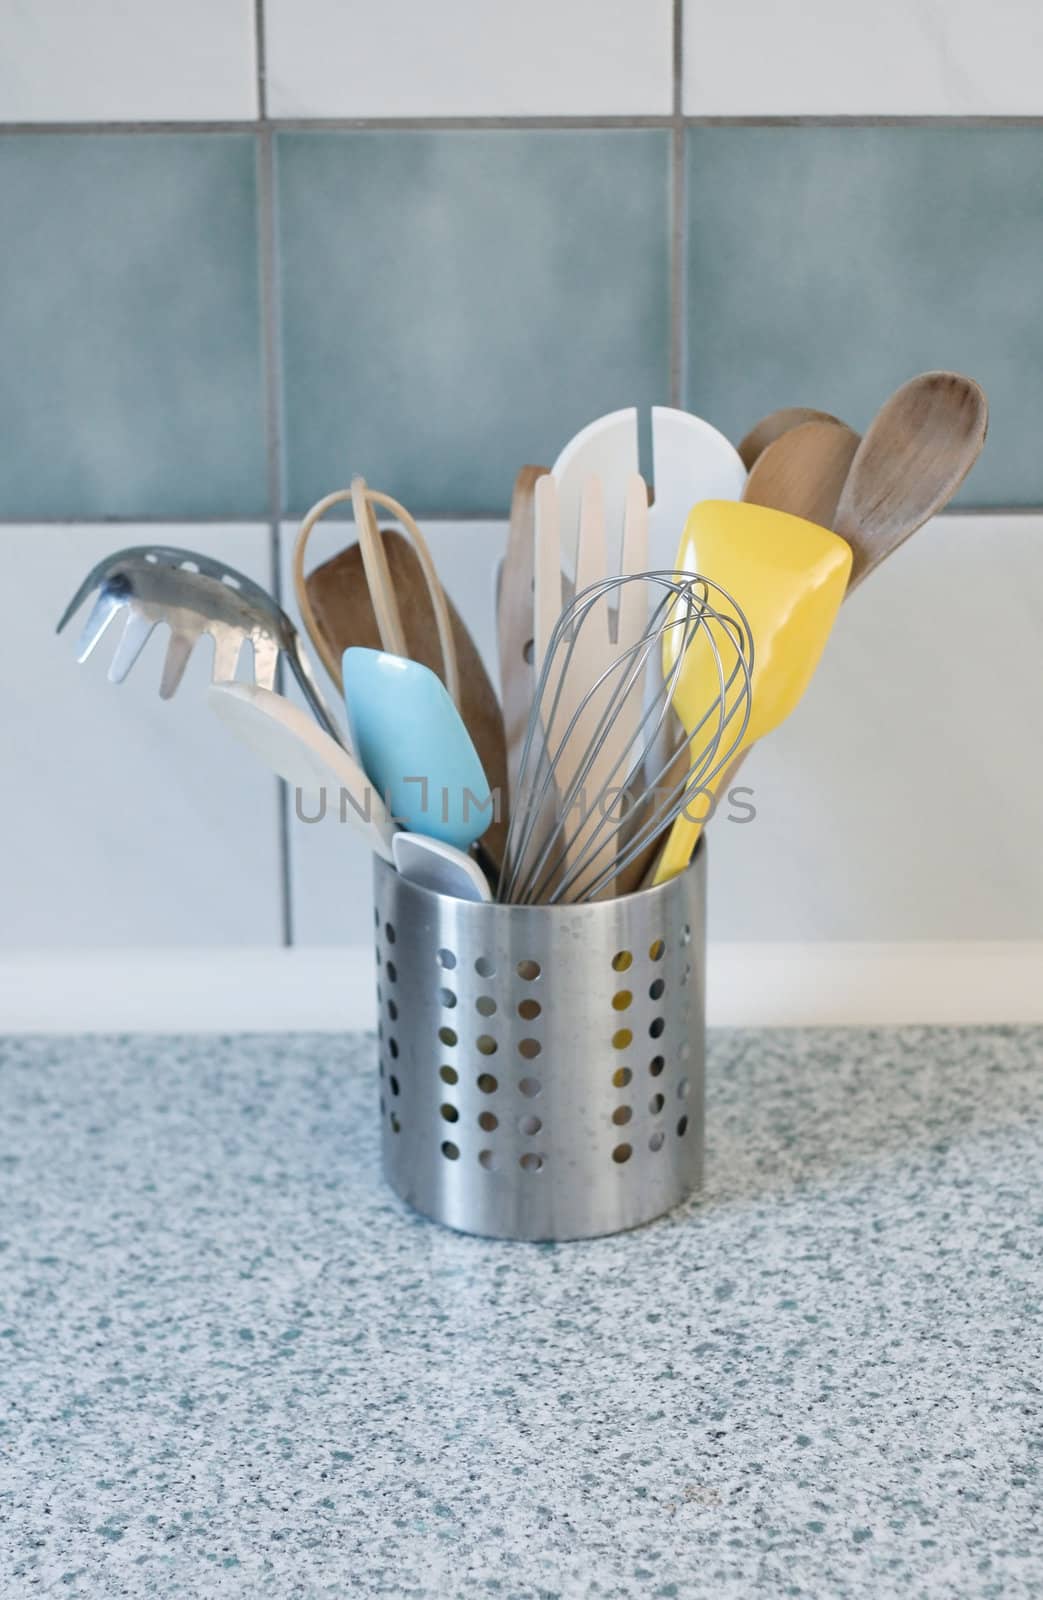 Kitchen tools by leeser